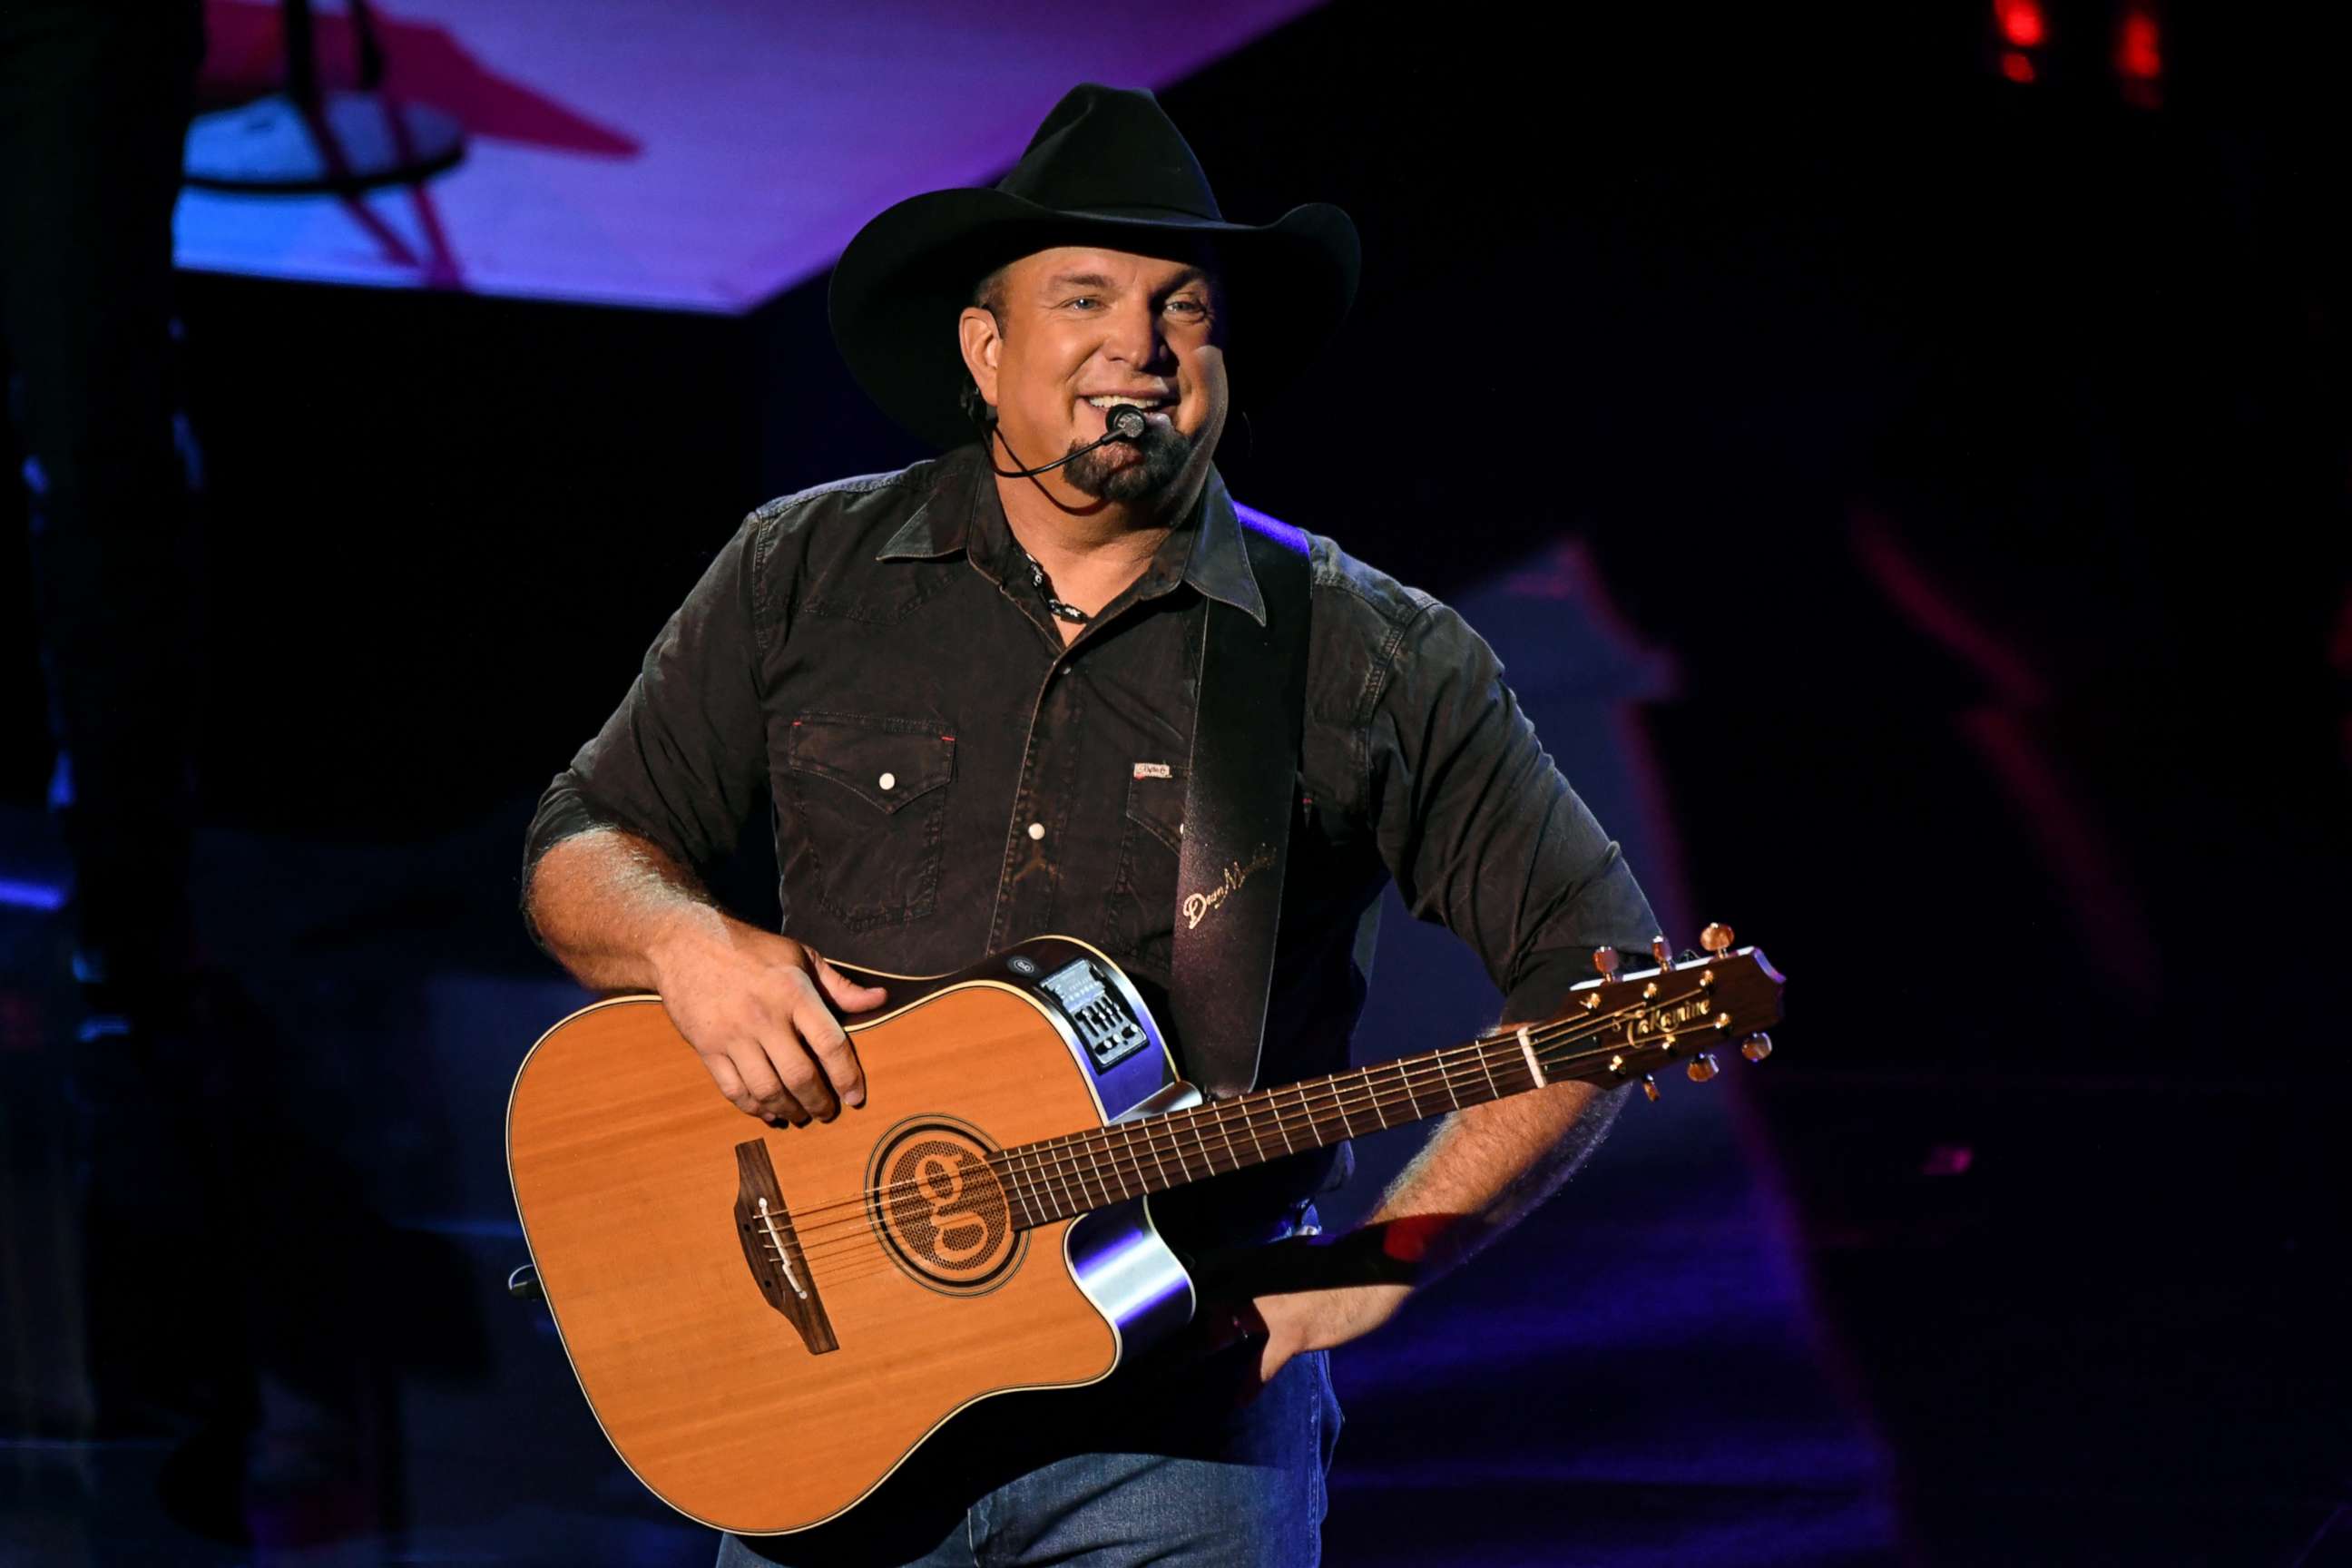 PHOTO: In this Oct. 14, 2020, file photo, Garth Brooks performs onstage at the 2020 Billboard Music Awards in Los Angeles.